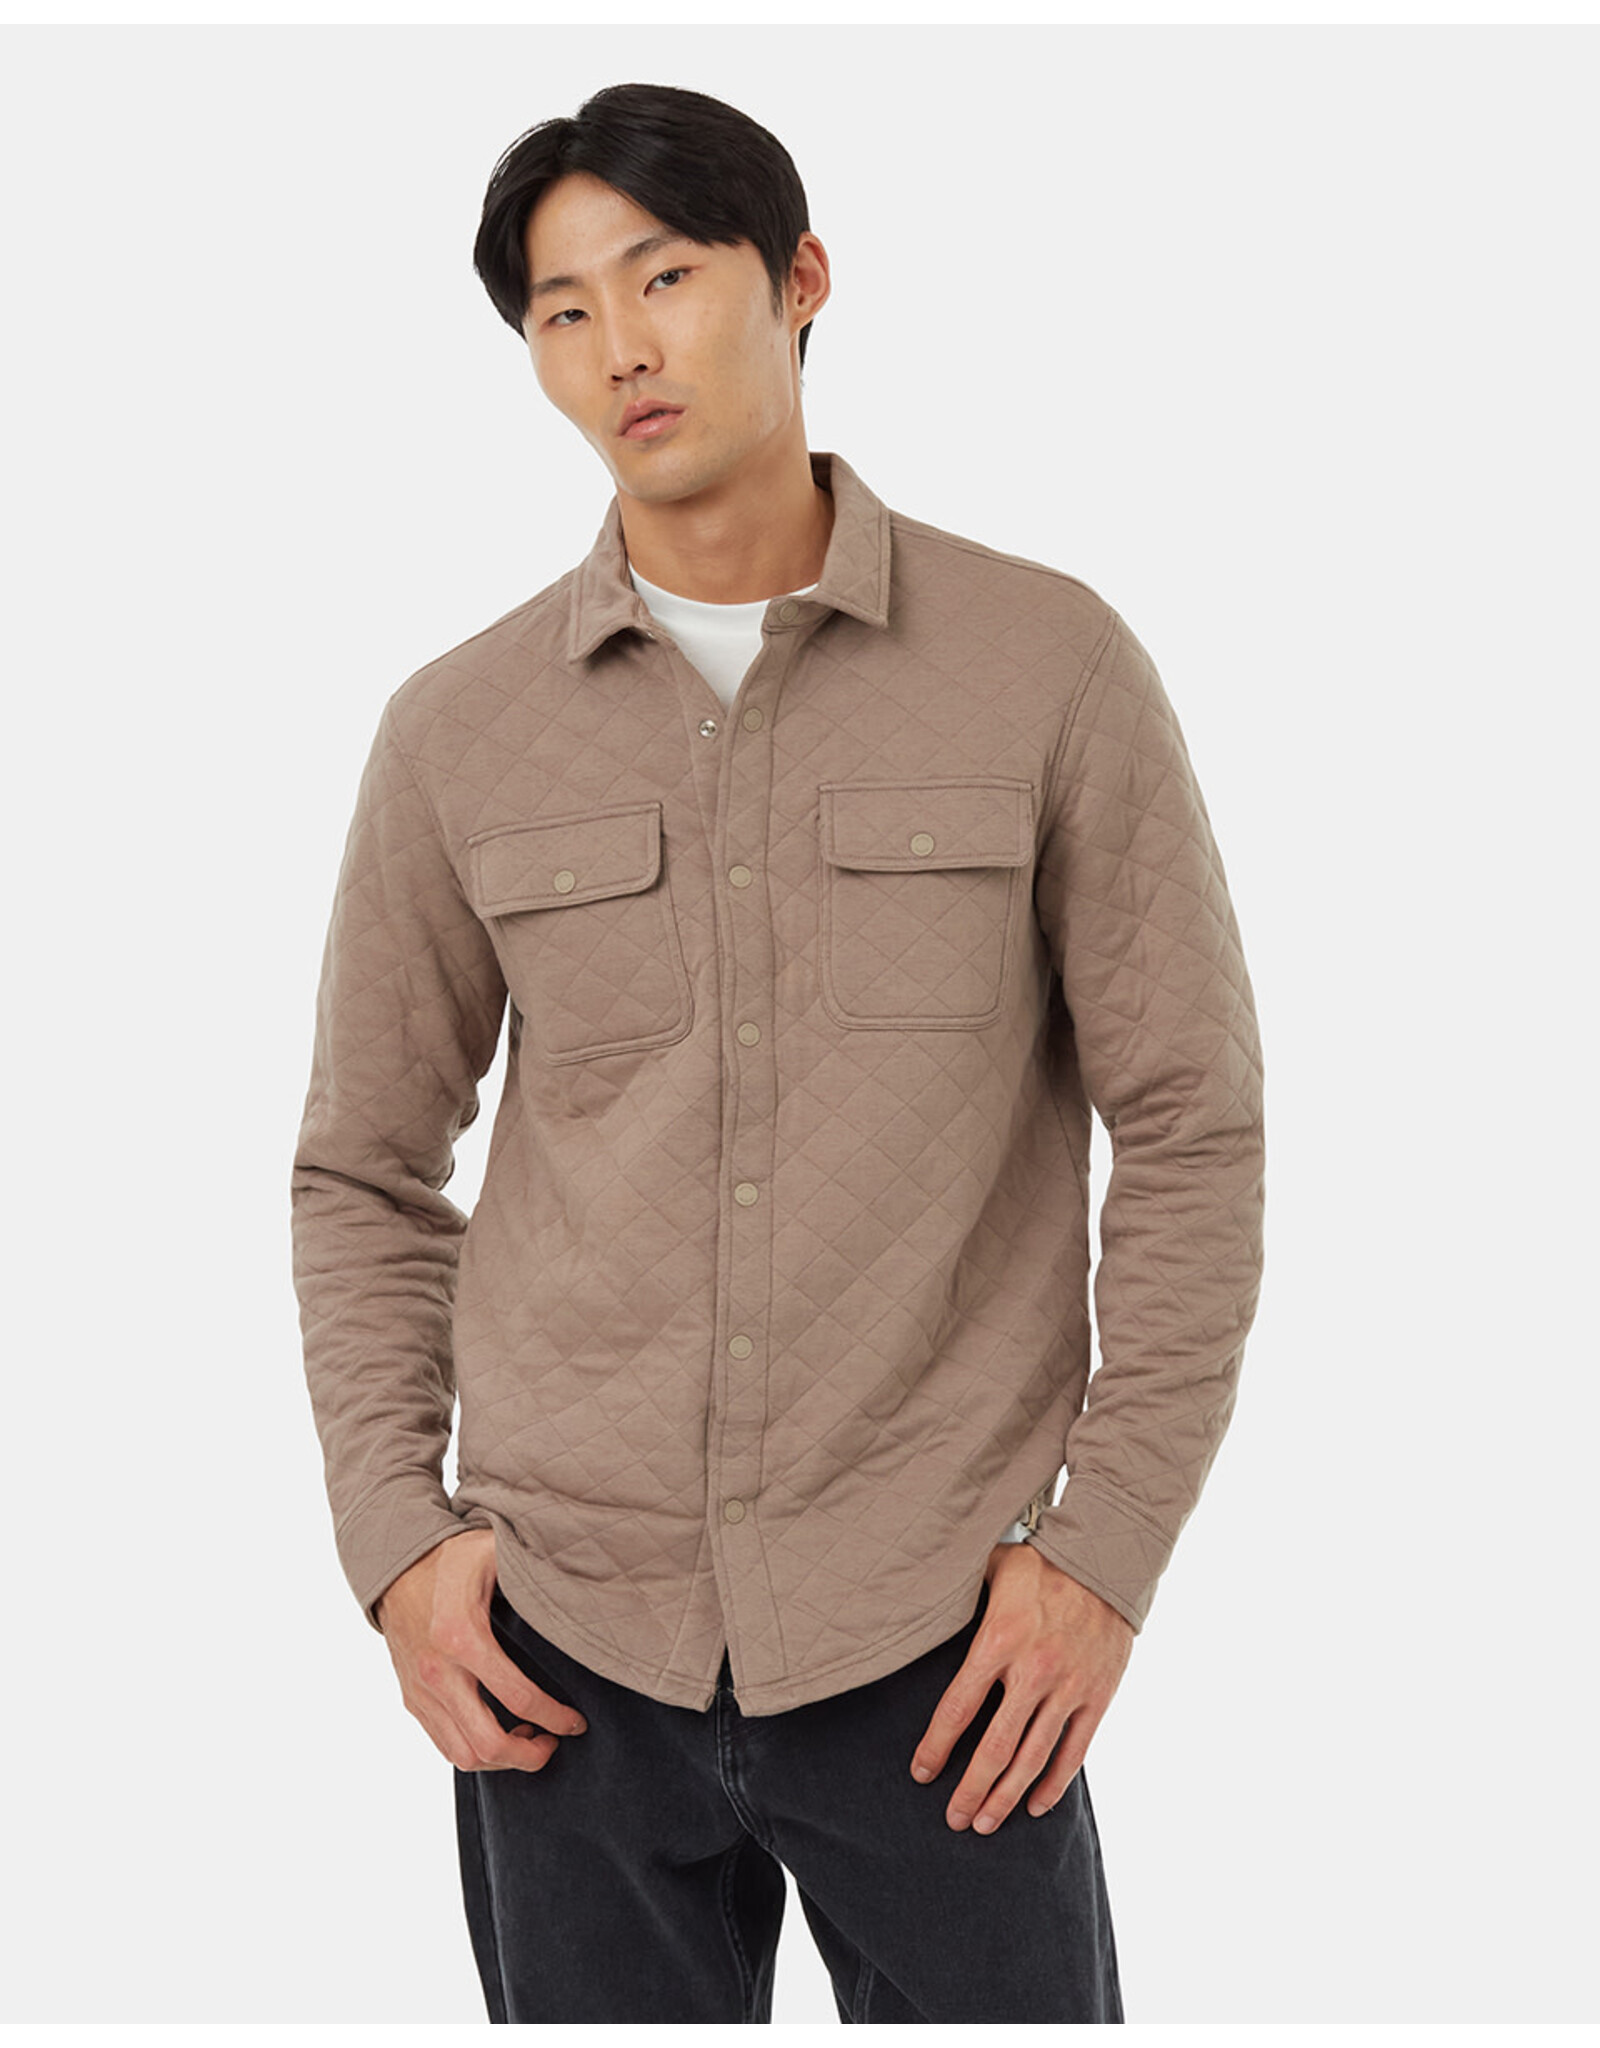 BGS Tentree - Quilted Shirt Jacket / Fossil